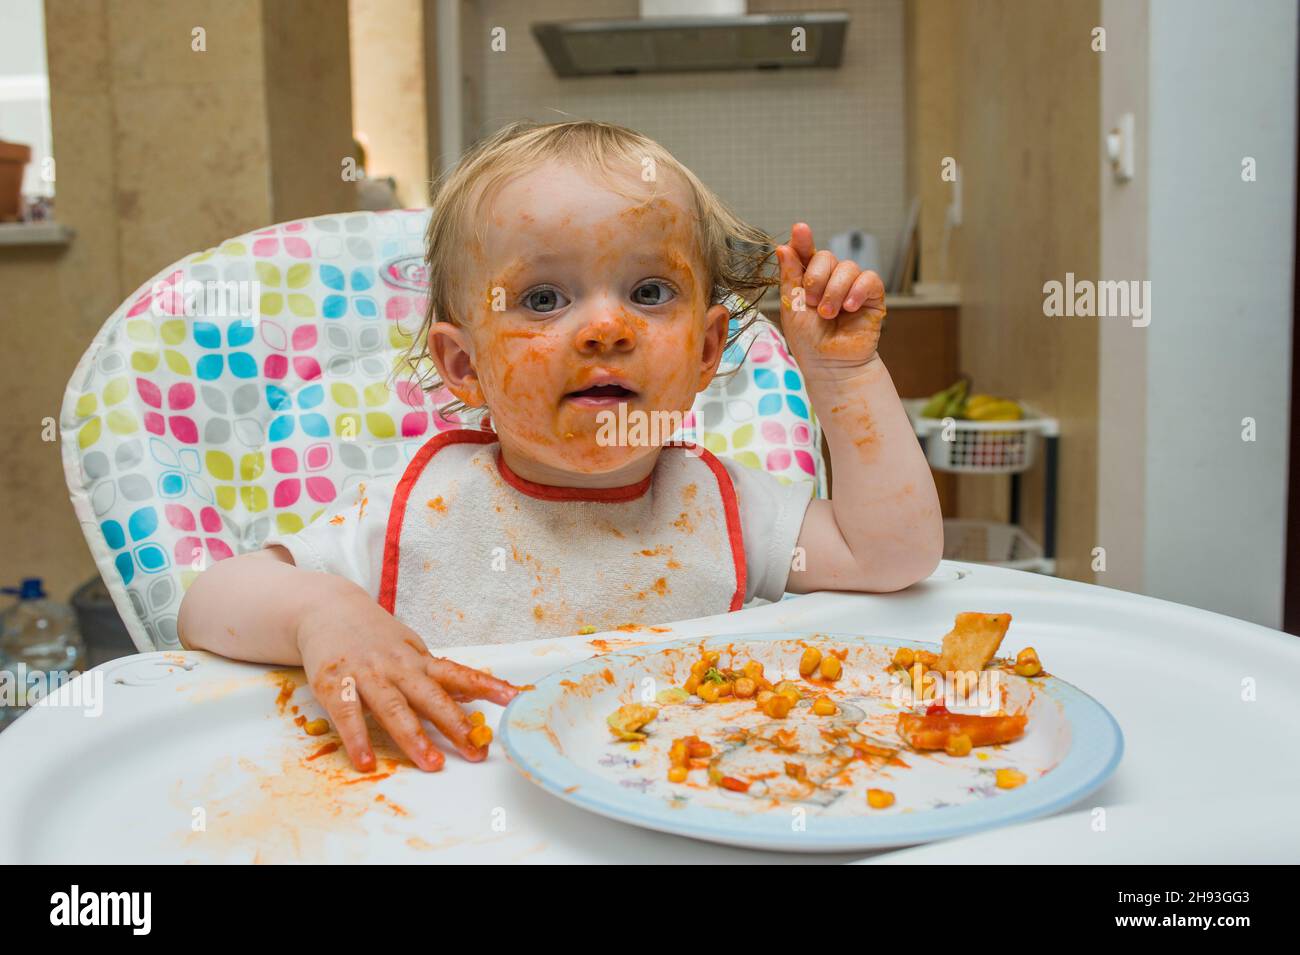 A baby girl (age 15 months) eats a meal of sweet corn and tomato sauce in a messy manner and plays with her food on a high chair in her home. Stock Photo